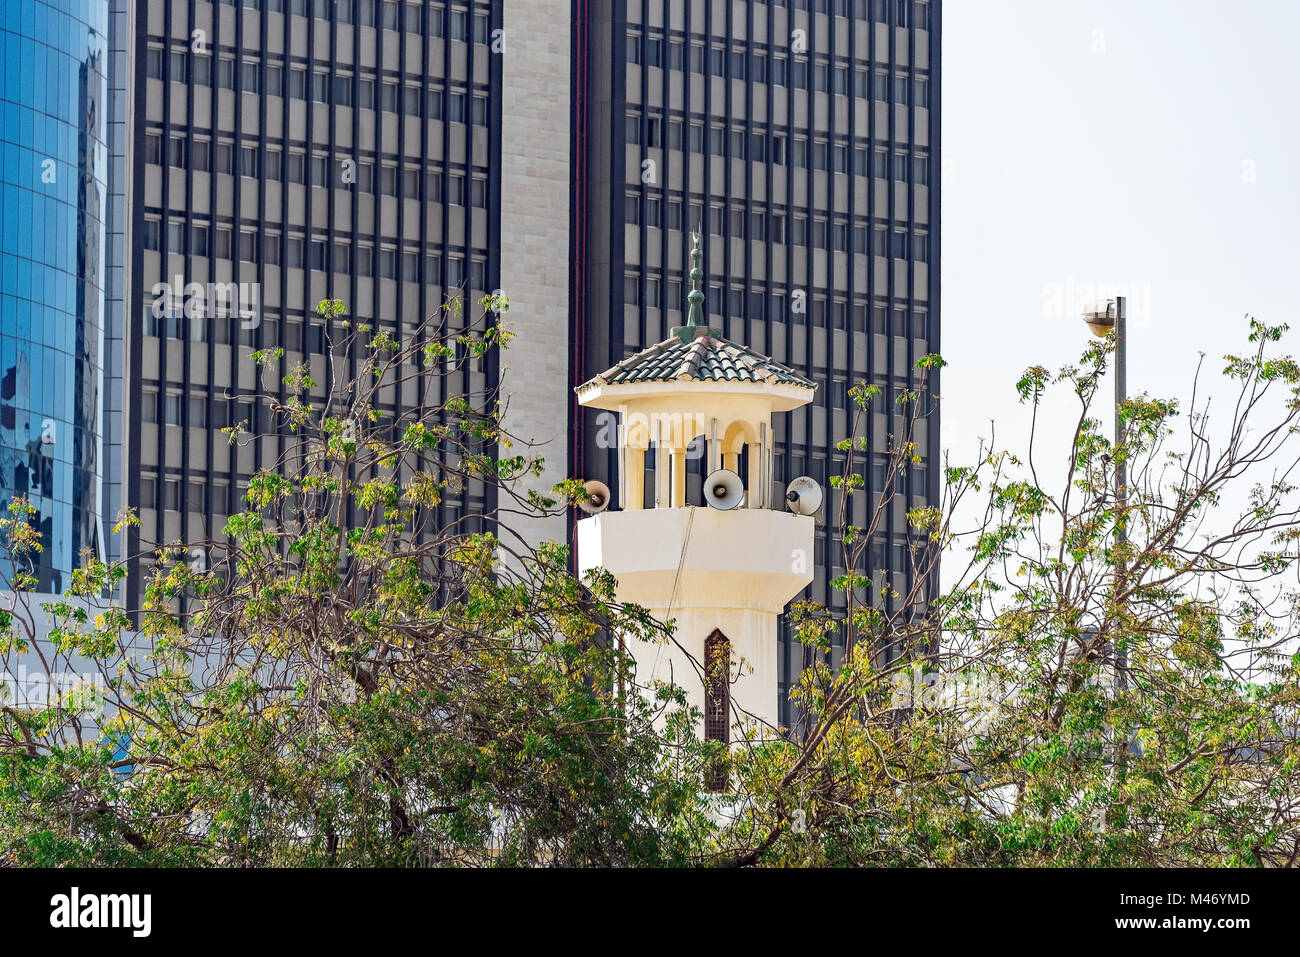 A Call to Prayer. Mosque tower in contrast wth modern office buildings, Jeddah, Saudi Arabia. Stock Photo